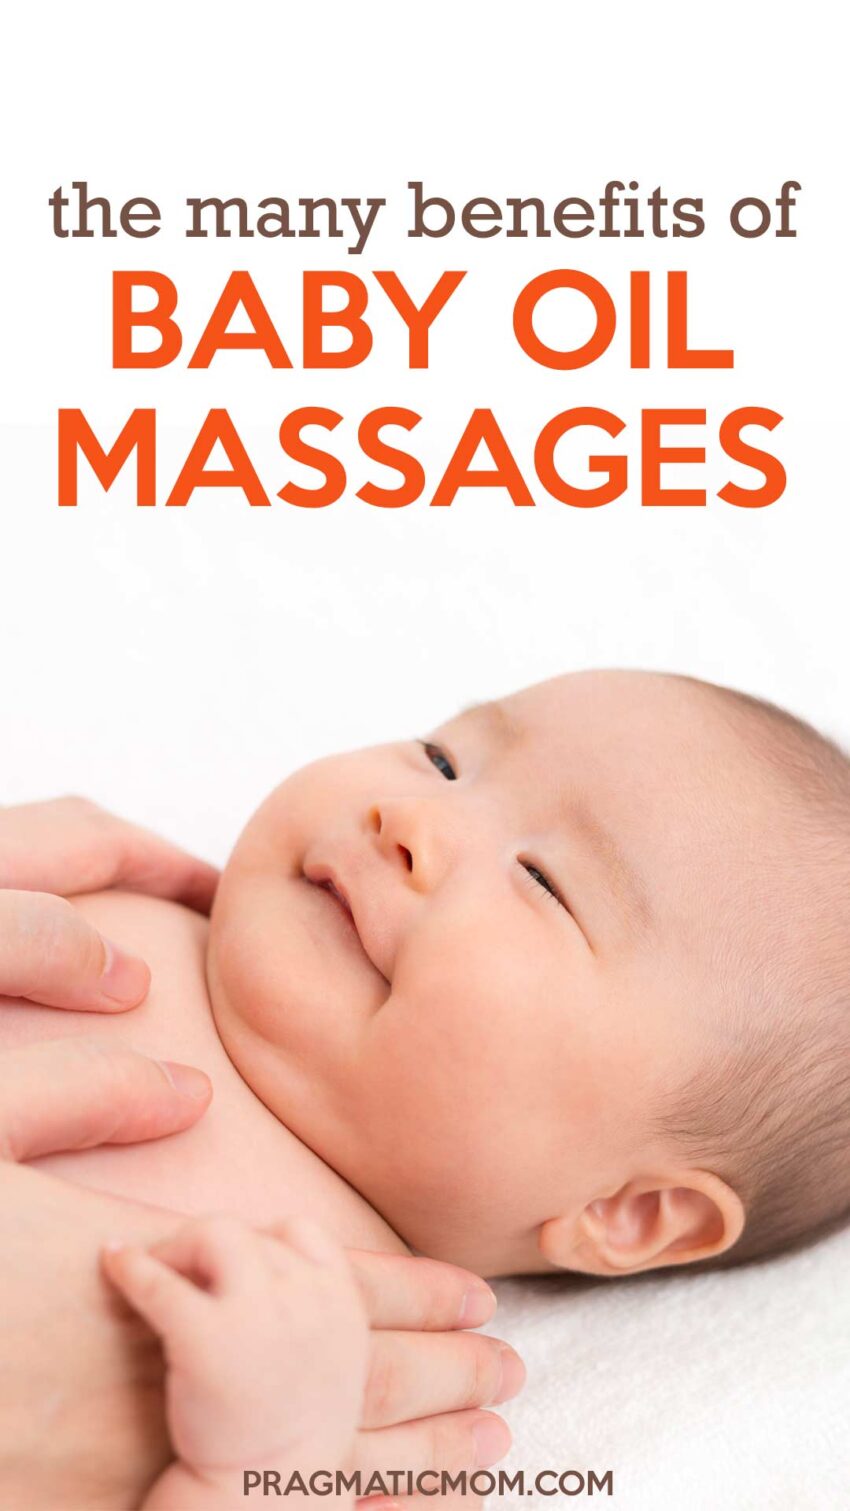 The Many Benefits of Baby Oil Massages